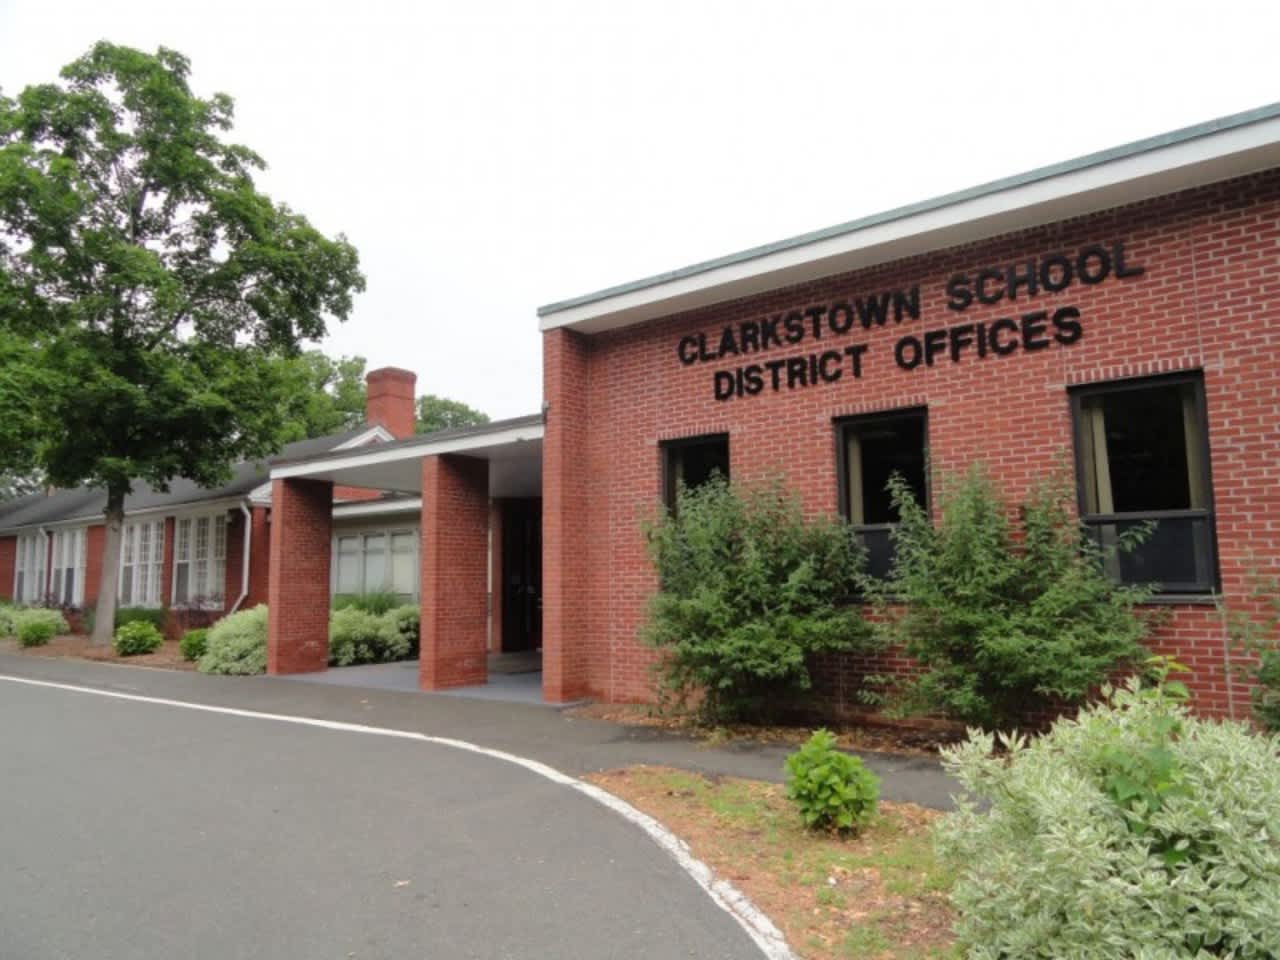 Clarkstown Central School District offices.